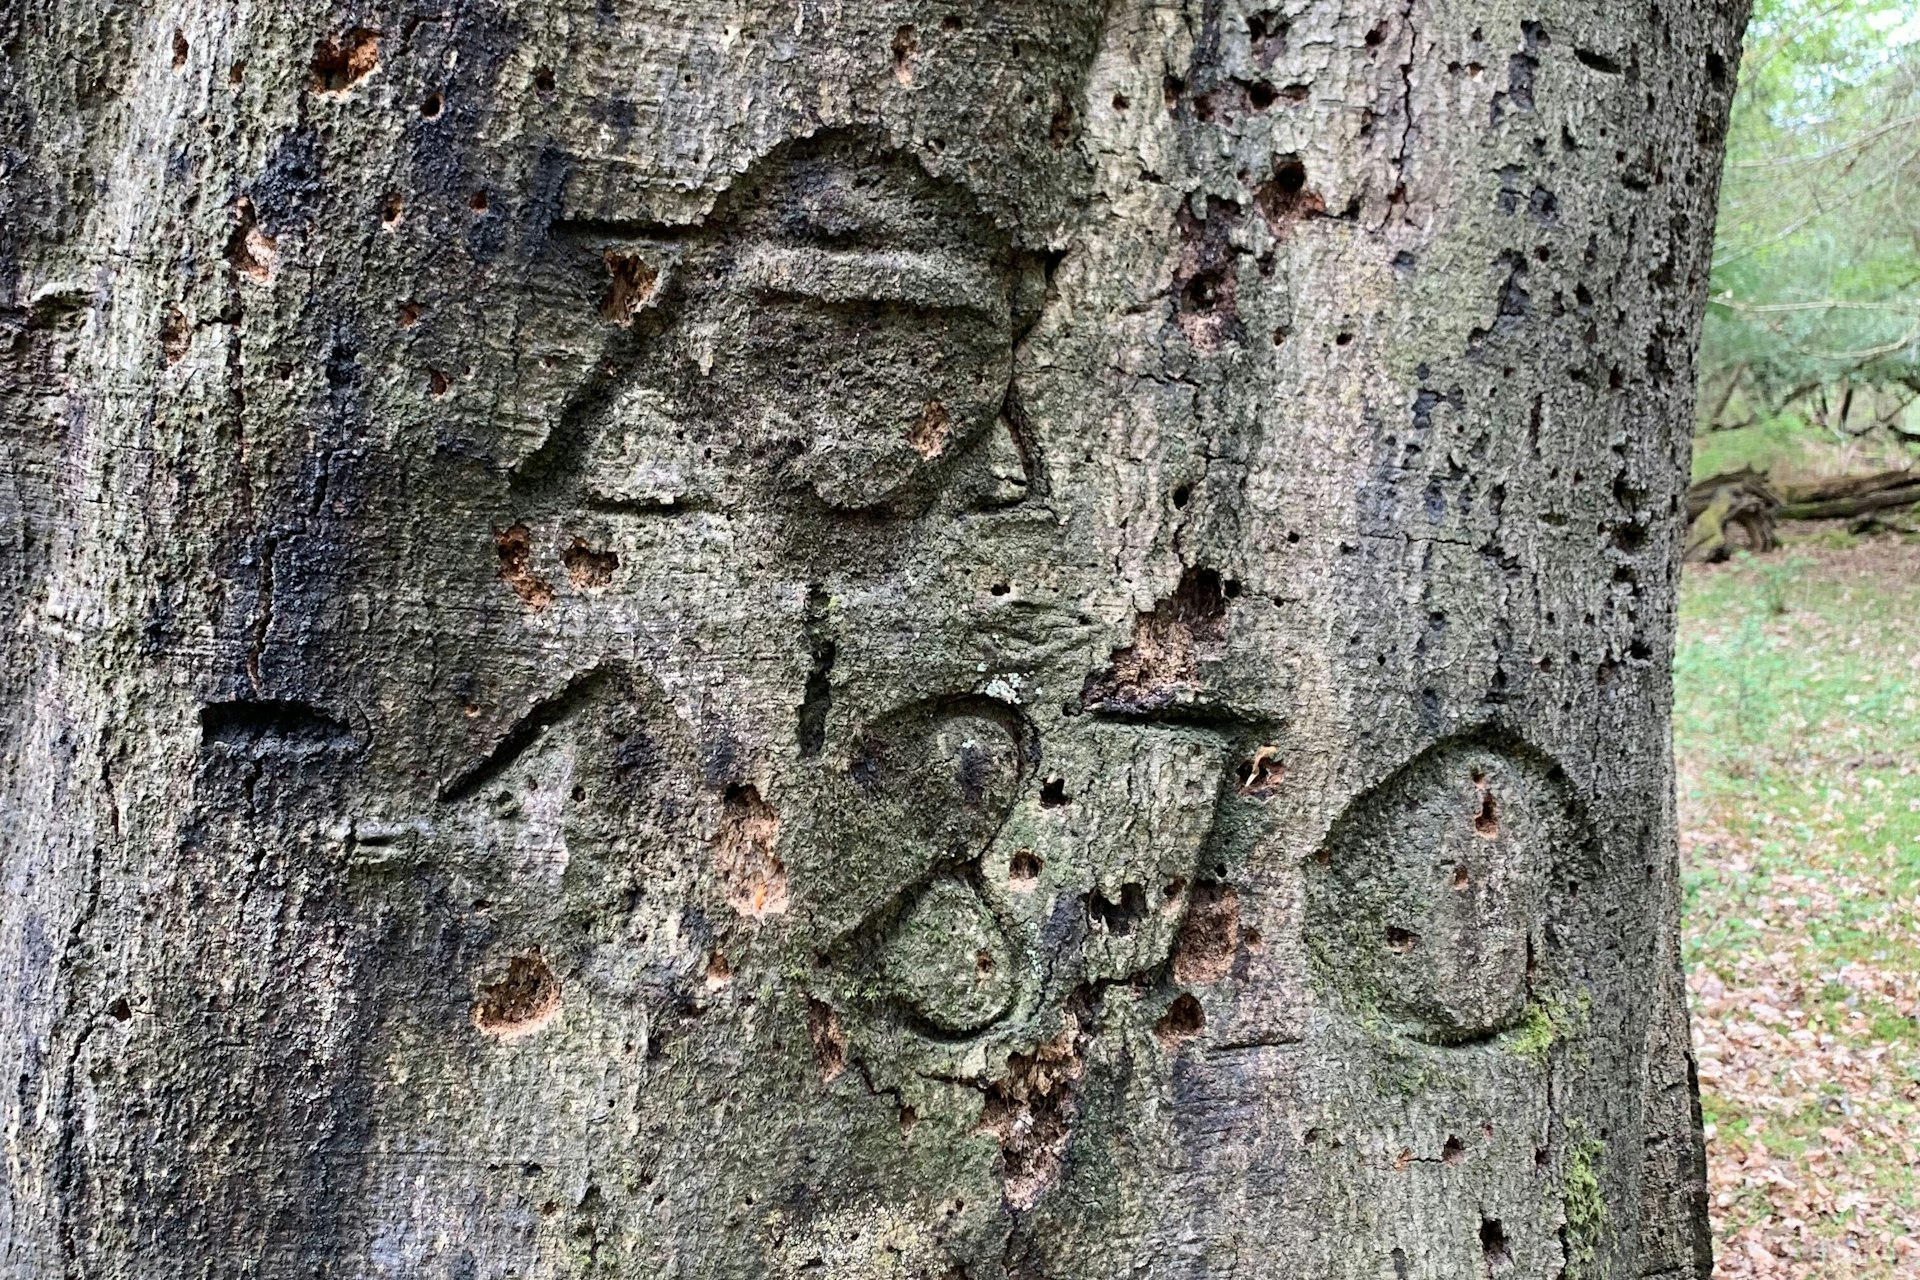 Graffiti carved into a tree in the New Forest